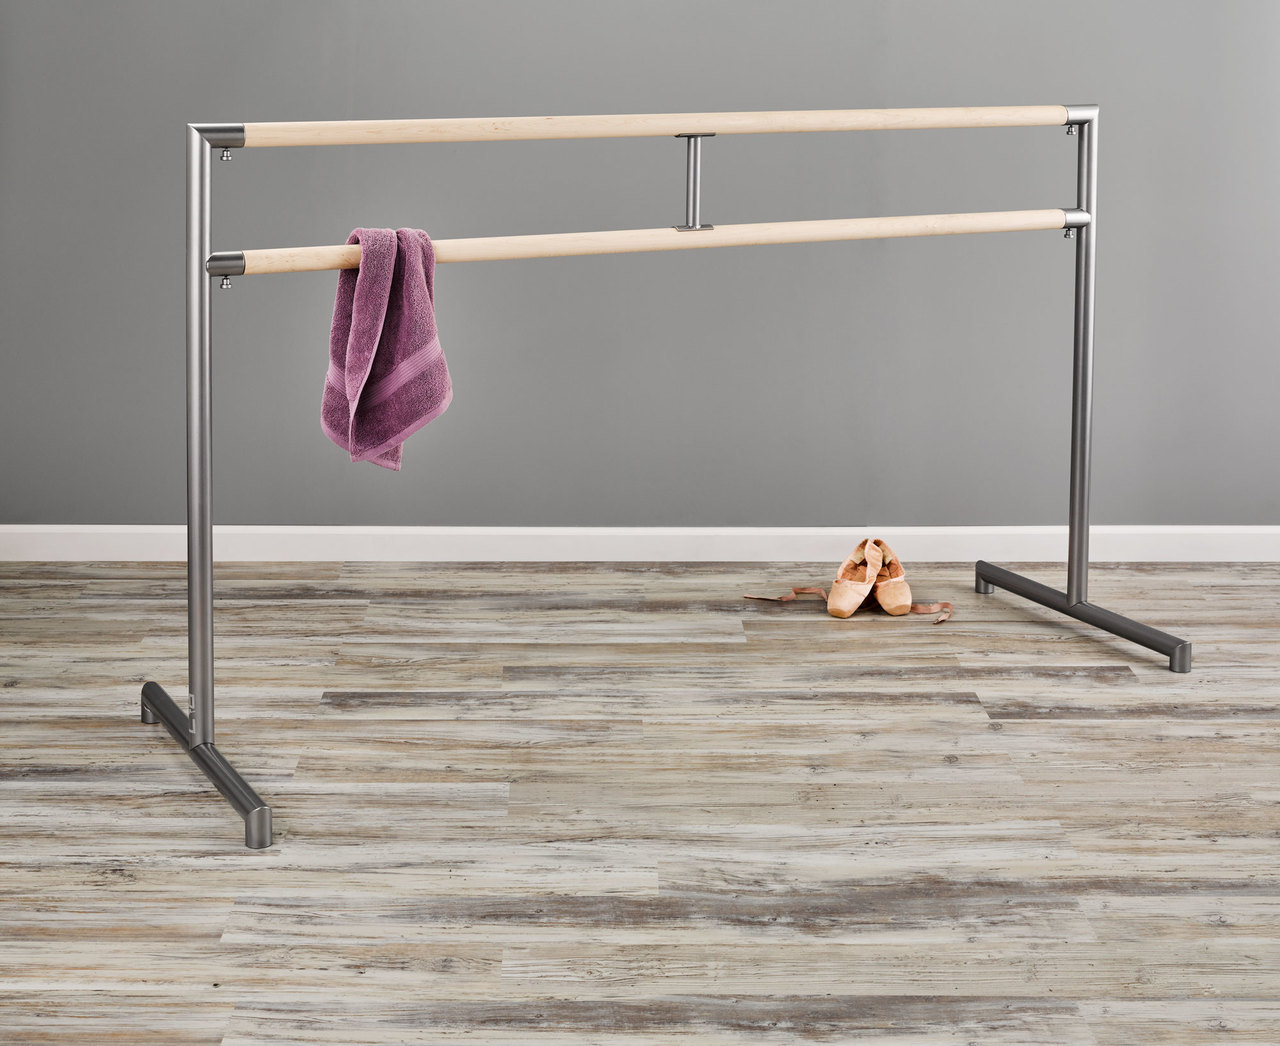 The Dance Buzz: The Search for Portable Ballet Barres